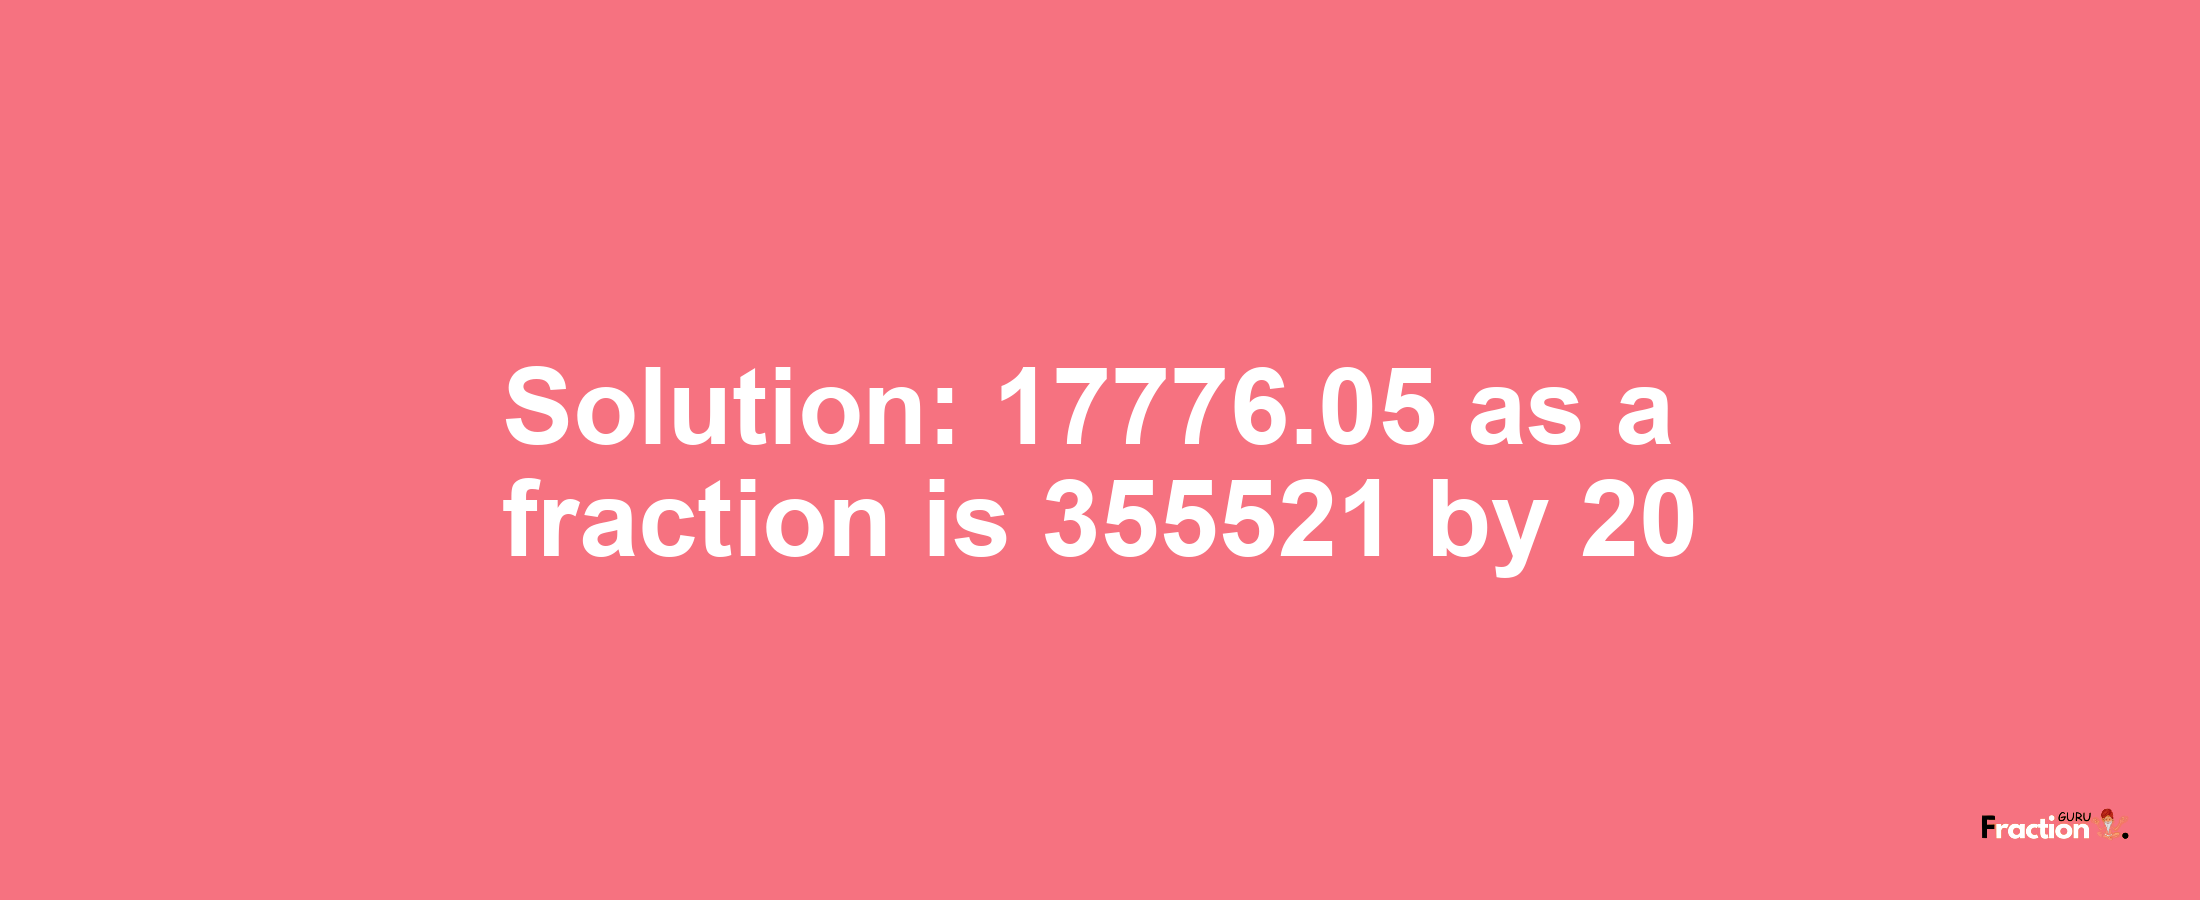 Solution:17776.05 as a fraction is 355521/20